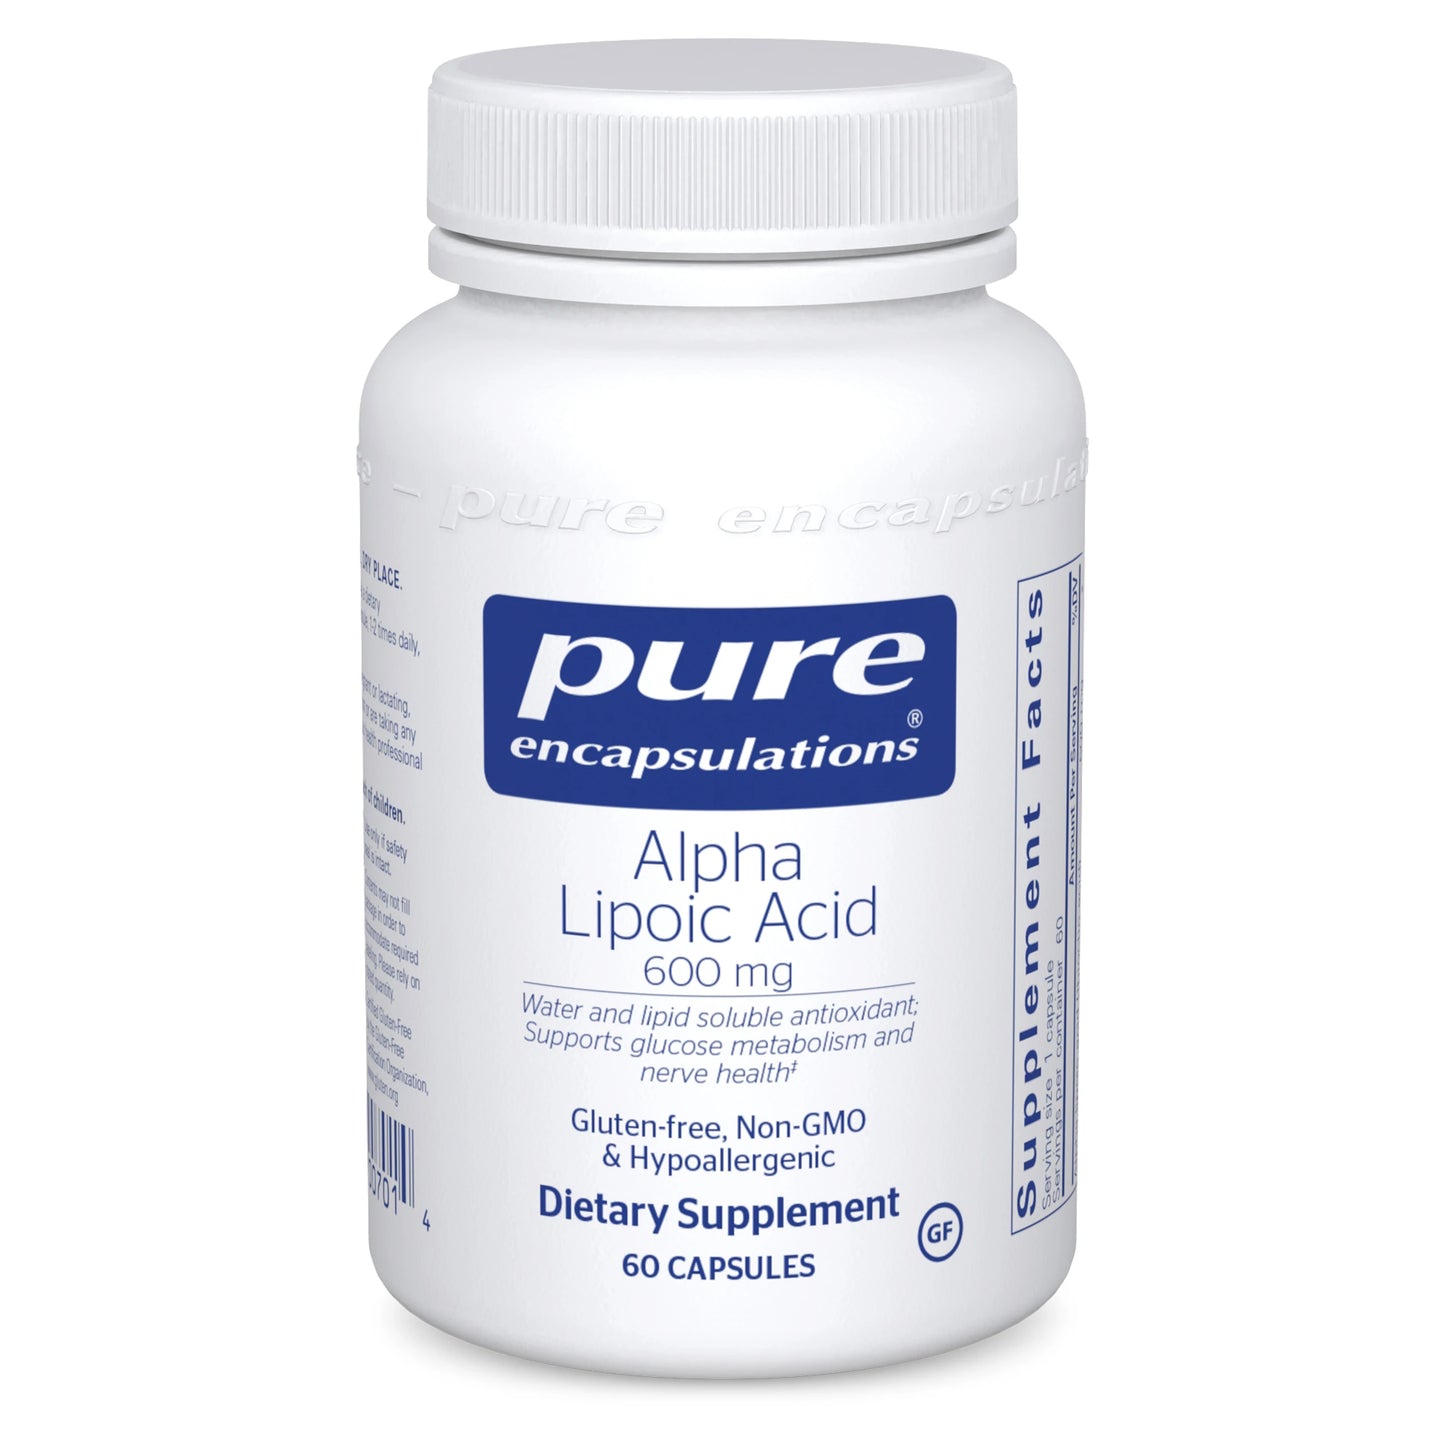 Alpha Lipoic Acid helps maintain healthy glucose metabolism, supports the nervous system, and provides nutritional support for metabolic processes. Pure Encapsulations Alpha Lipoic Acid supports healthy glucose metabolism and the nervous system with water and fat-soluble antioxidants.